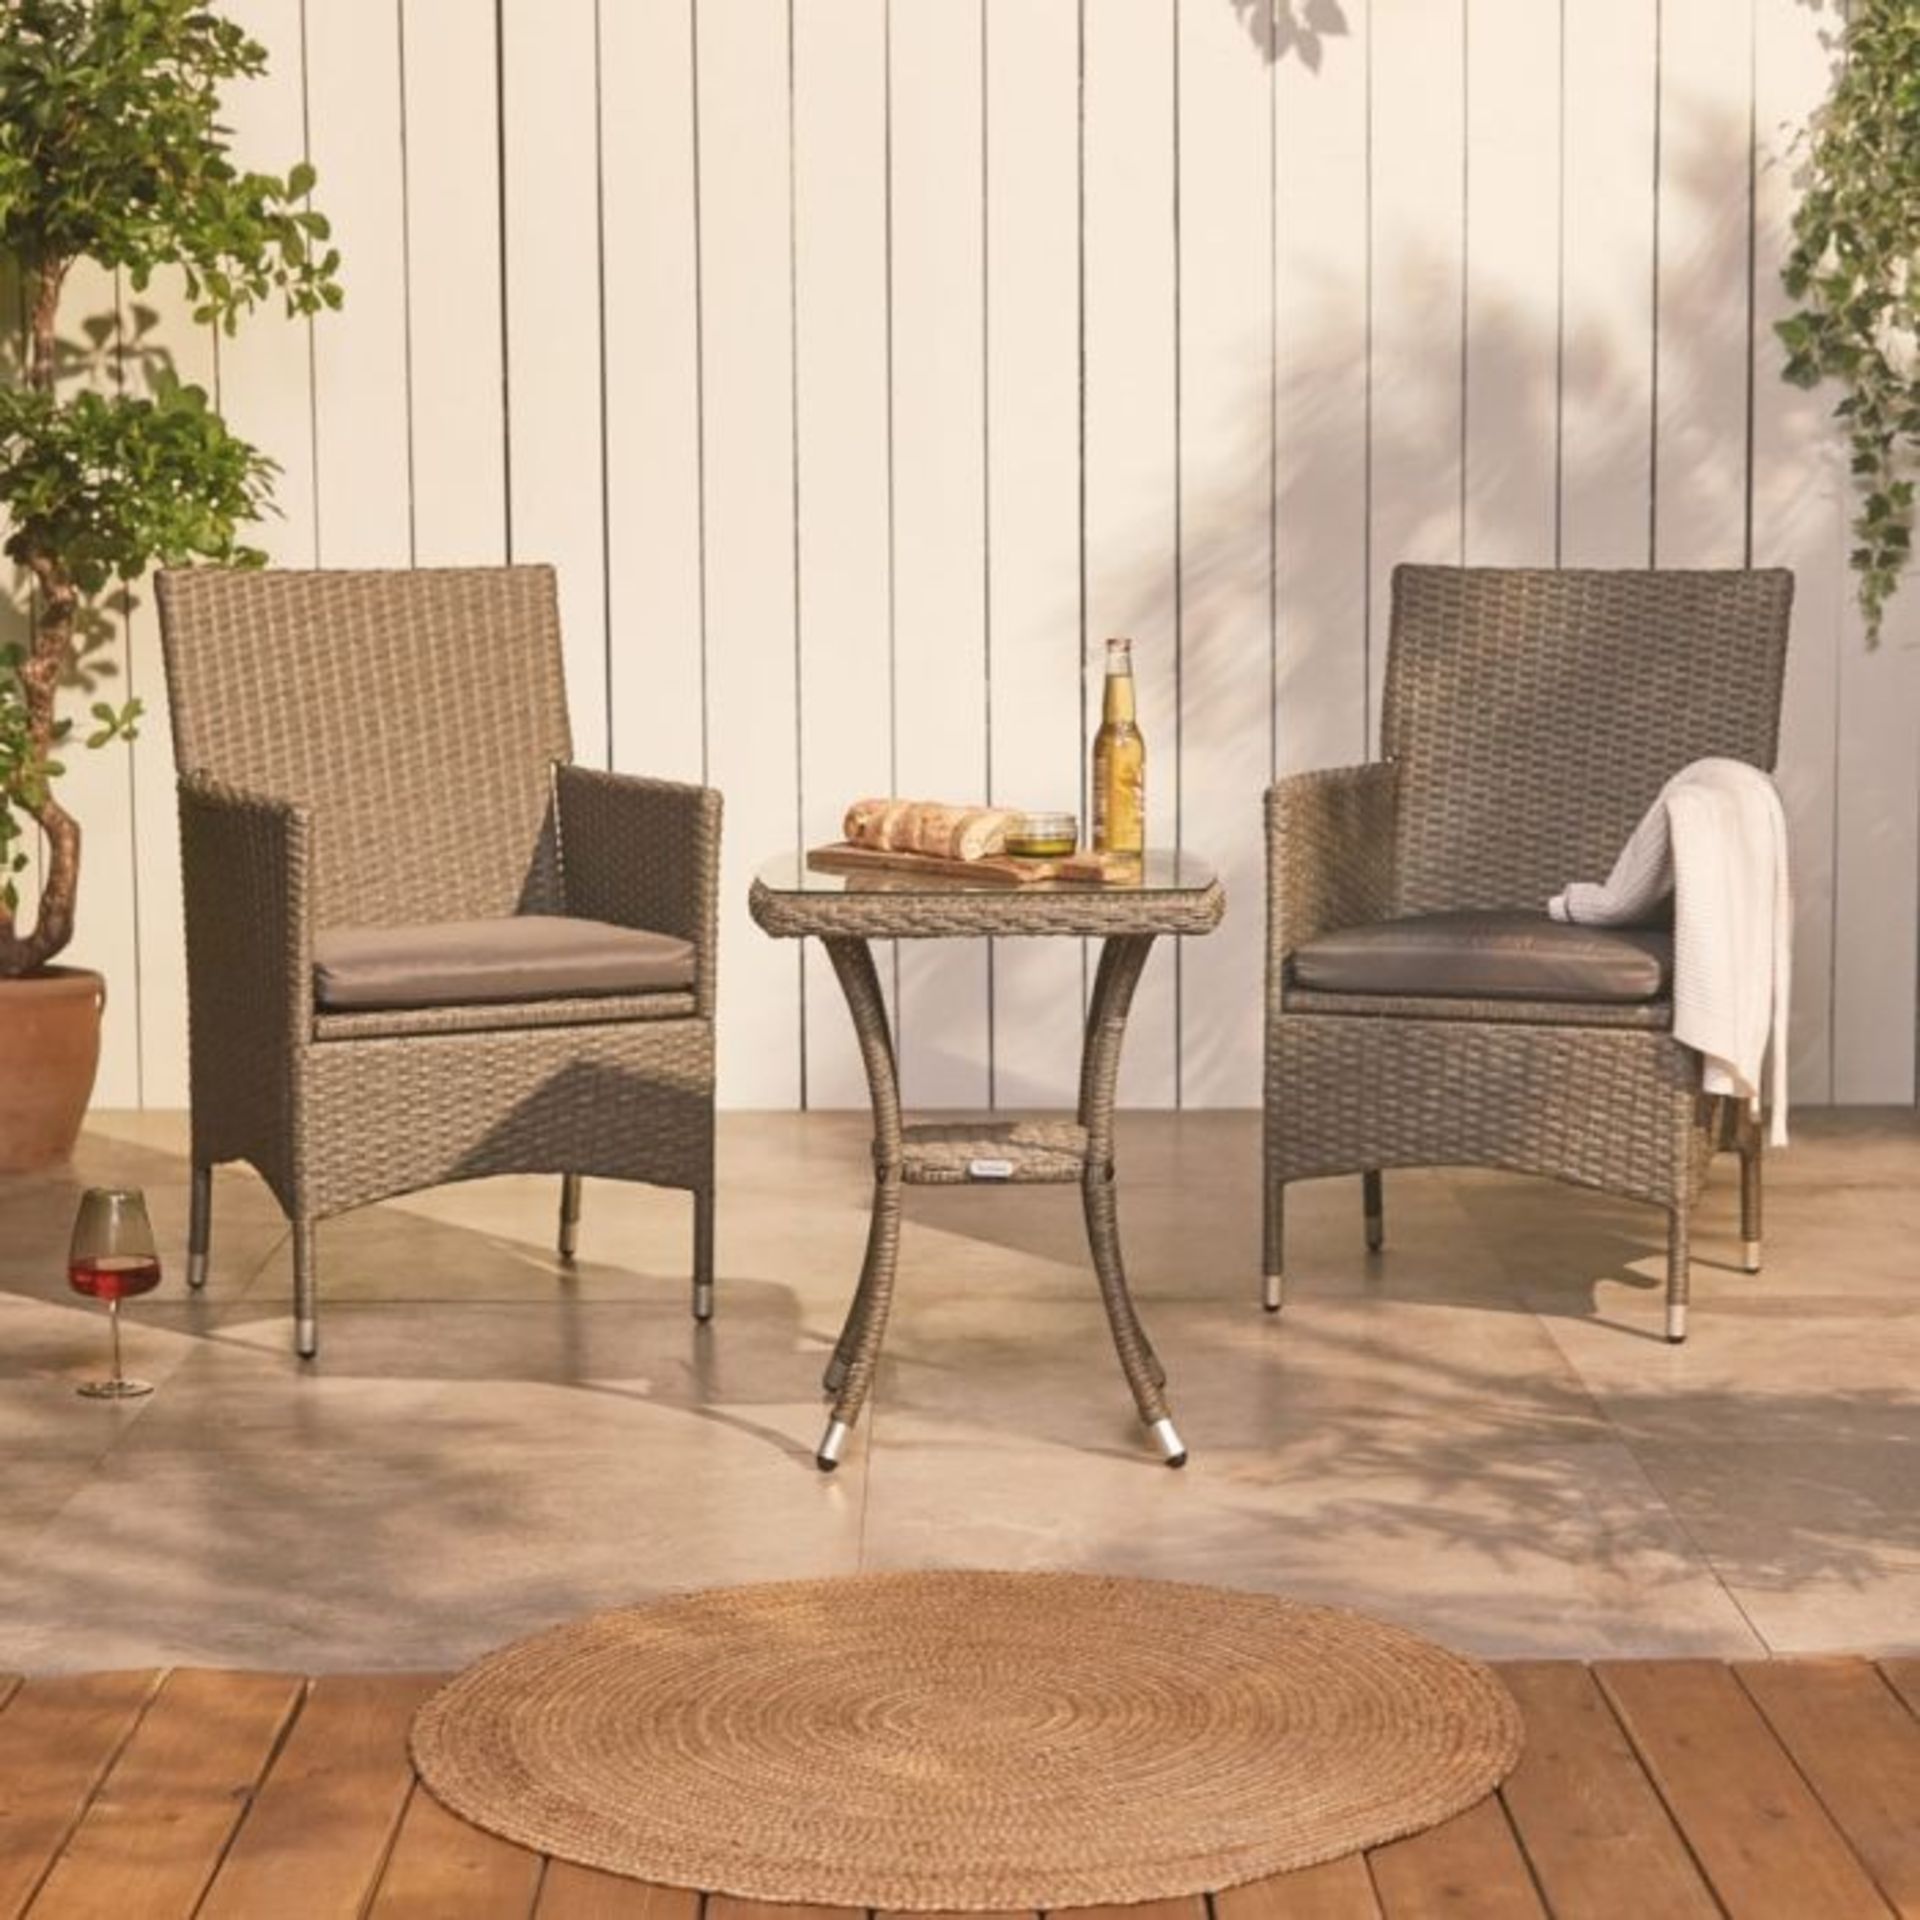 Rattan Bistro Set – Patio Table And Chairs - ER39